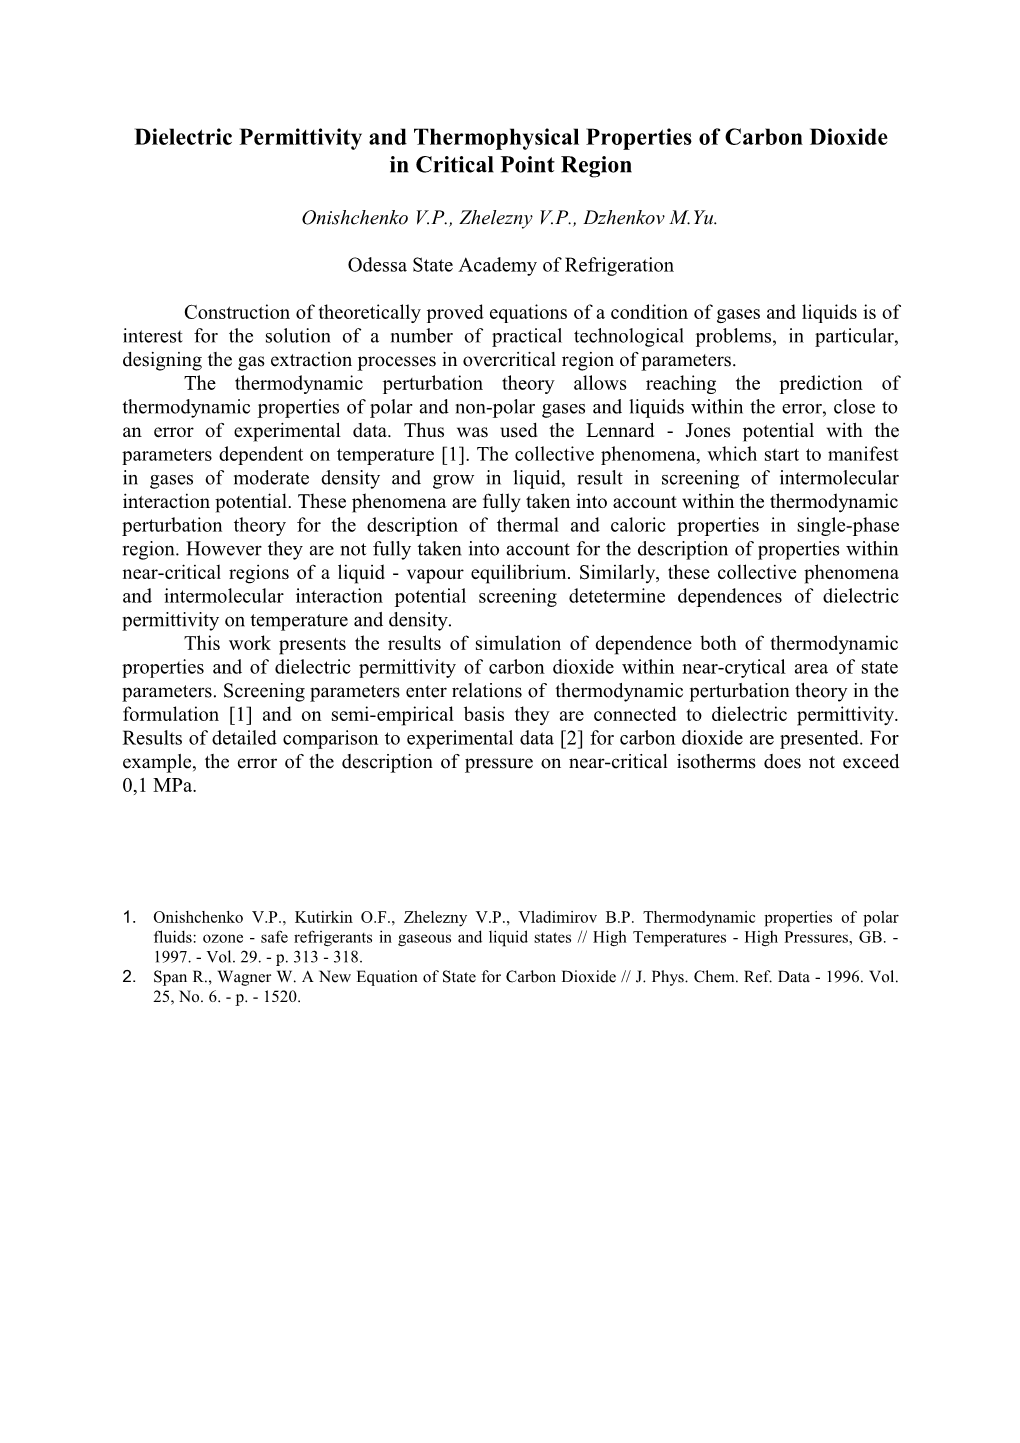 Dielectric Permittivity and Thermophysical Properties